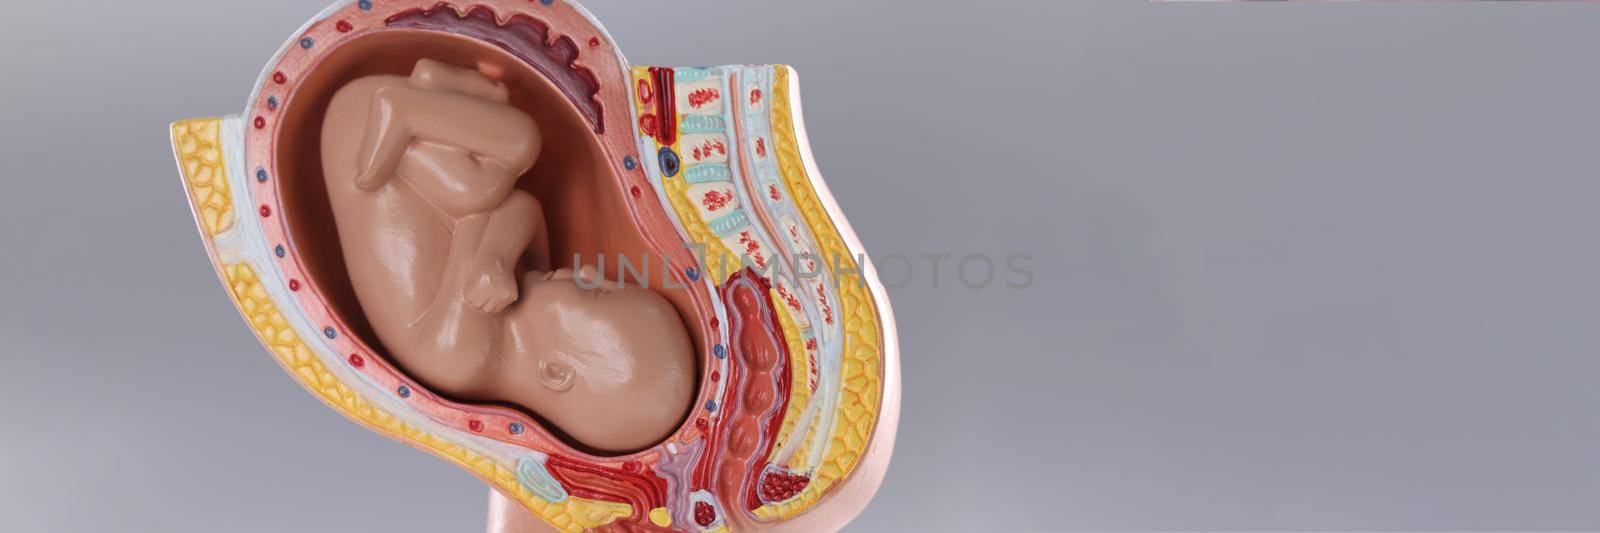 Closeup of artificial mock uterus with fetus on gray background by kuprevich